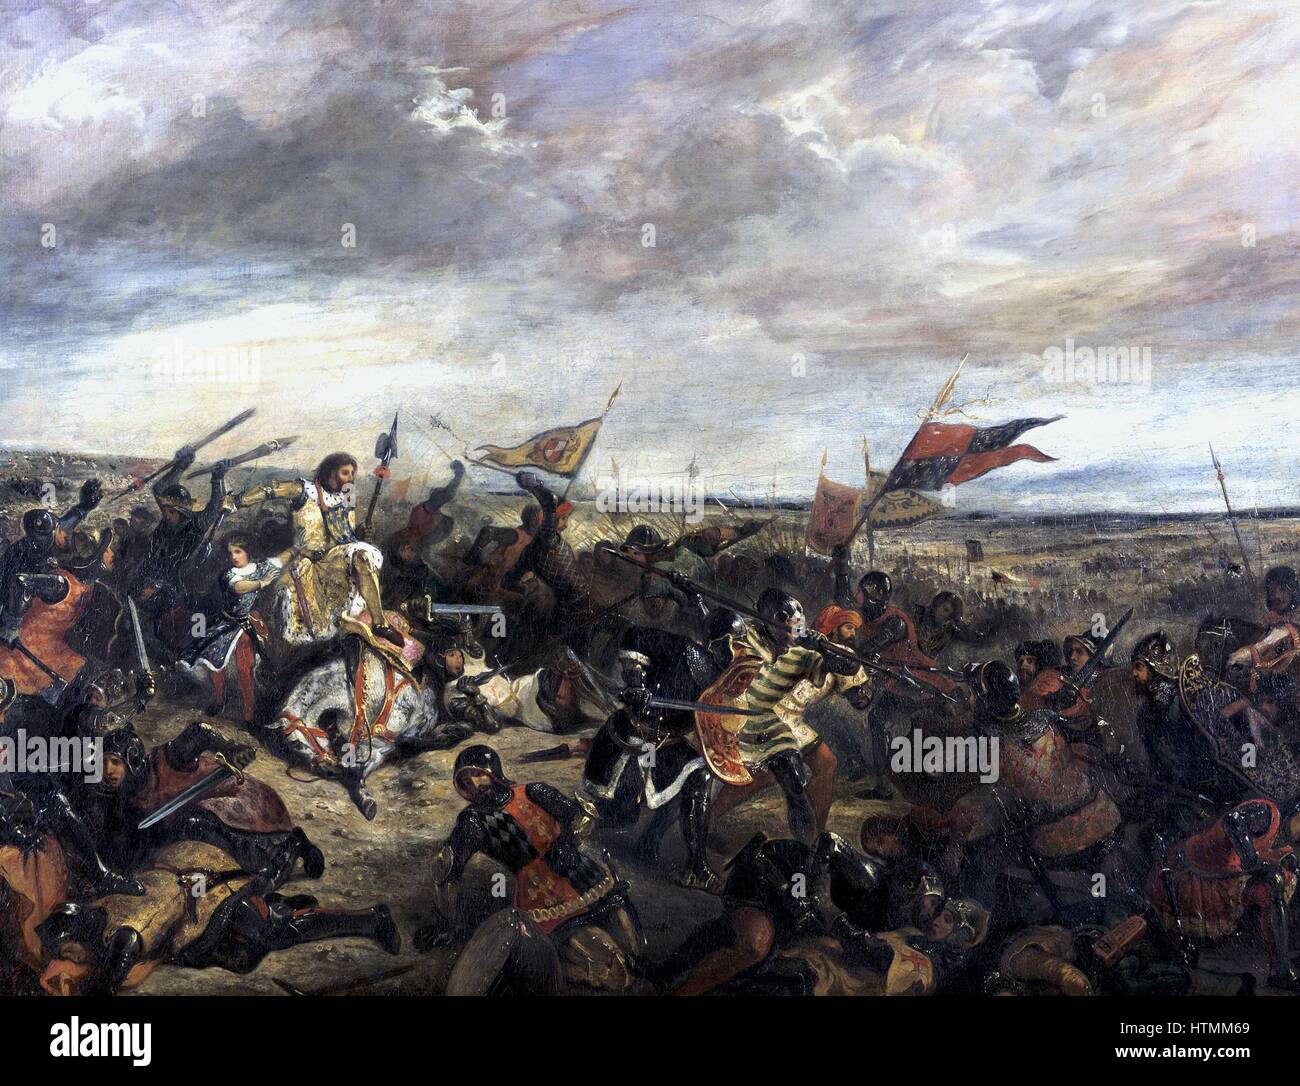 'Battle of Poitiers' also called 'King John at the Battle of Poitiers' 19 September 1356 between the English under Edward, the Black Prince (1330-1376). After the flight of 3 sections of the French army, the remaining section under King John or Jean II Stock Photo